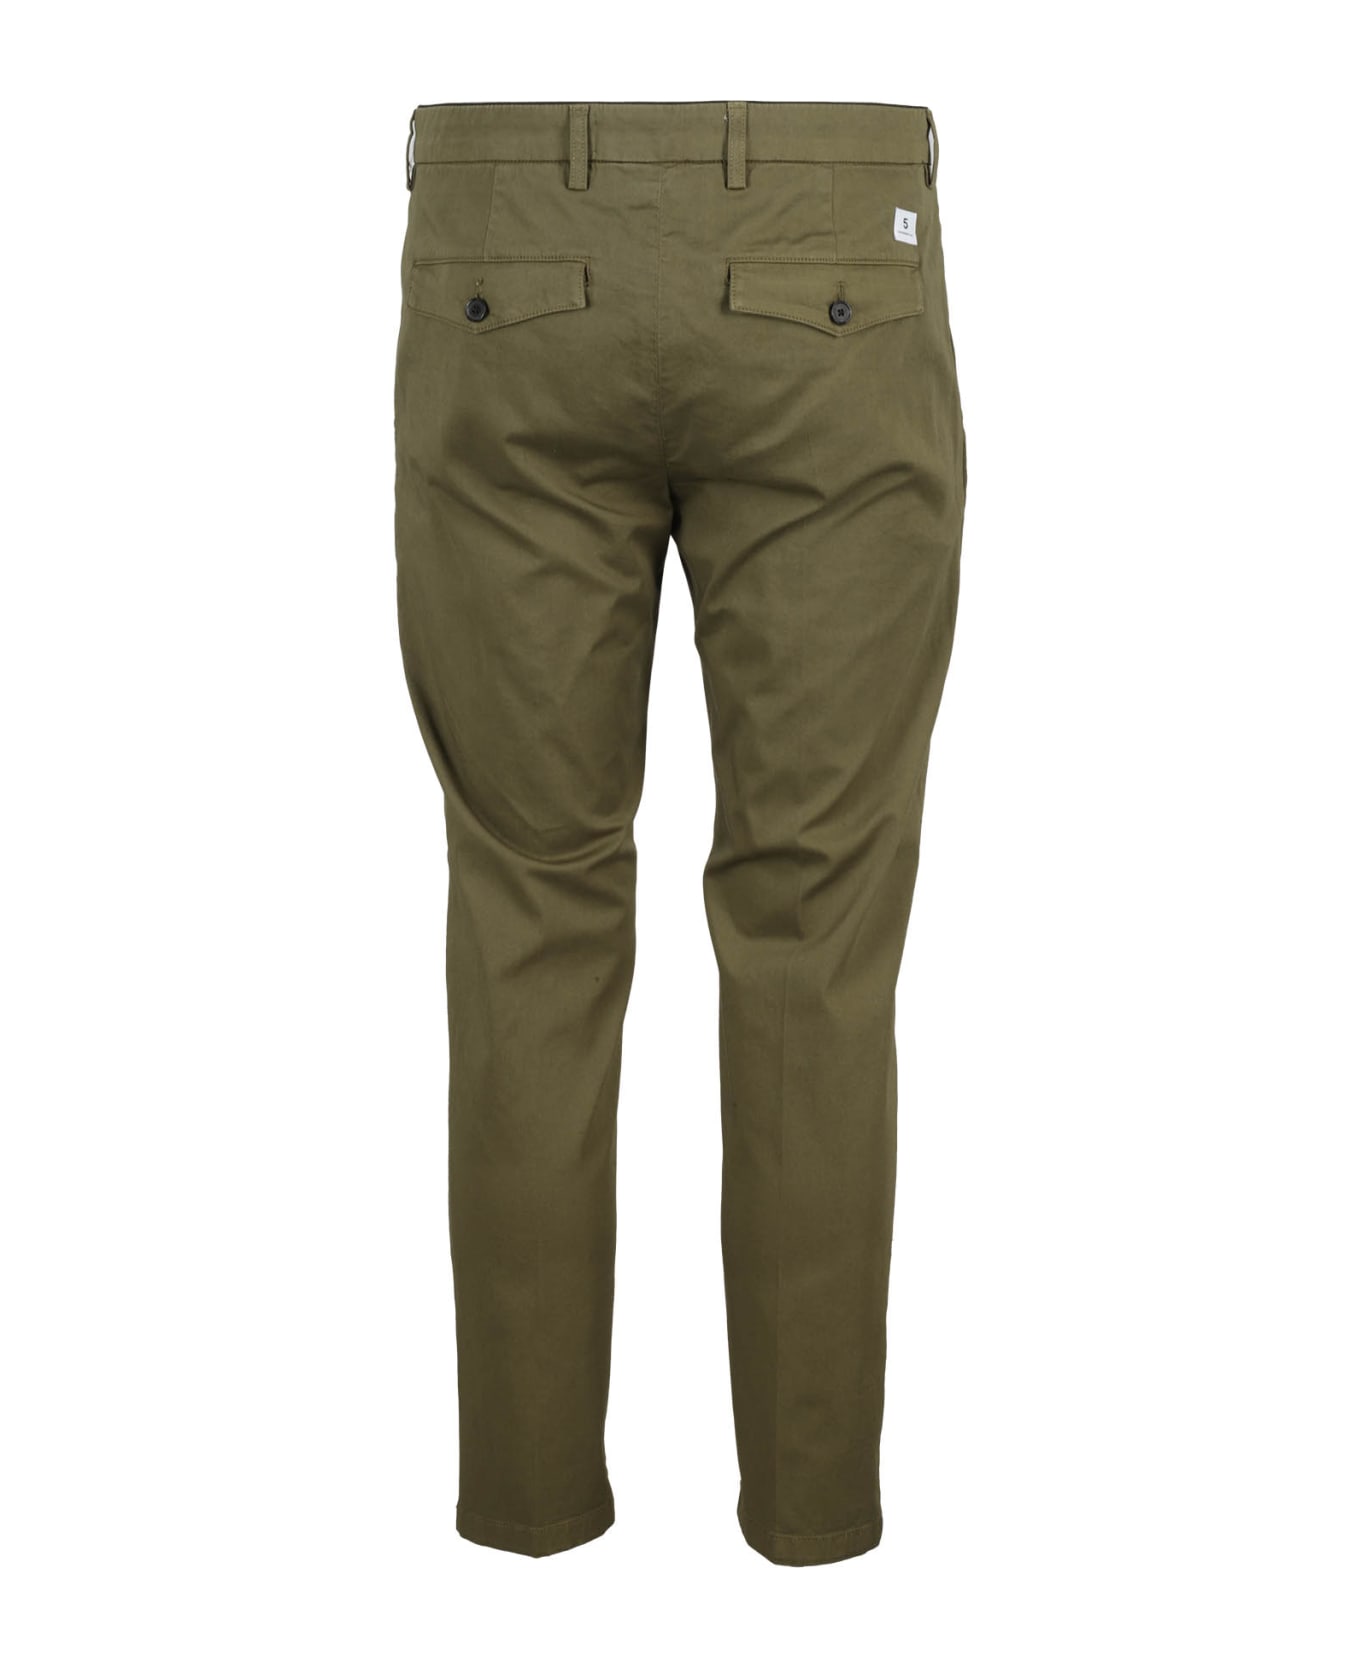 Department Five Prince Pences Chinos - Militare